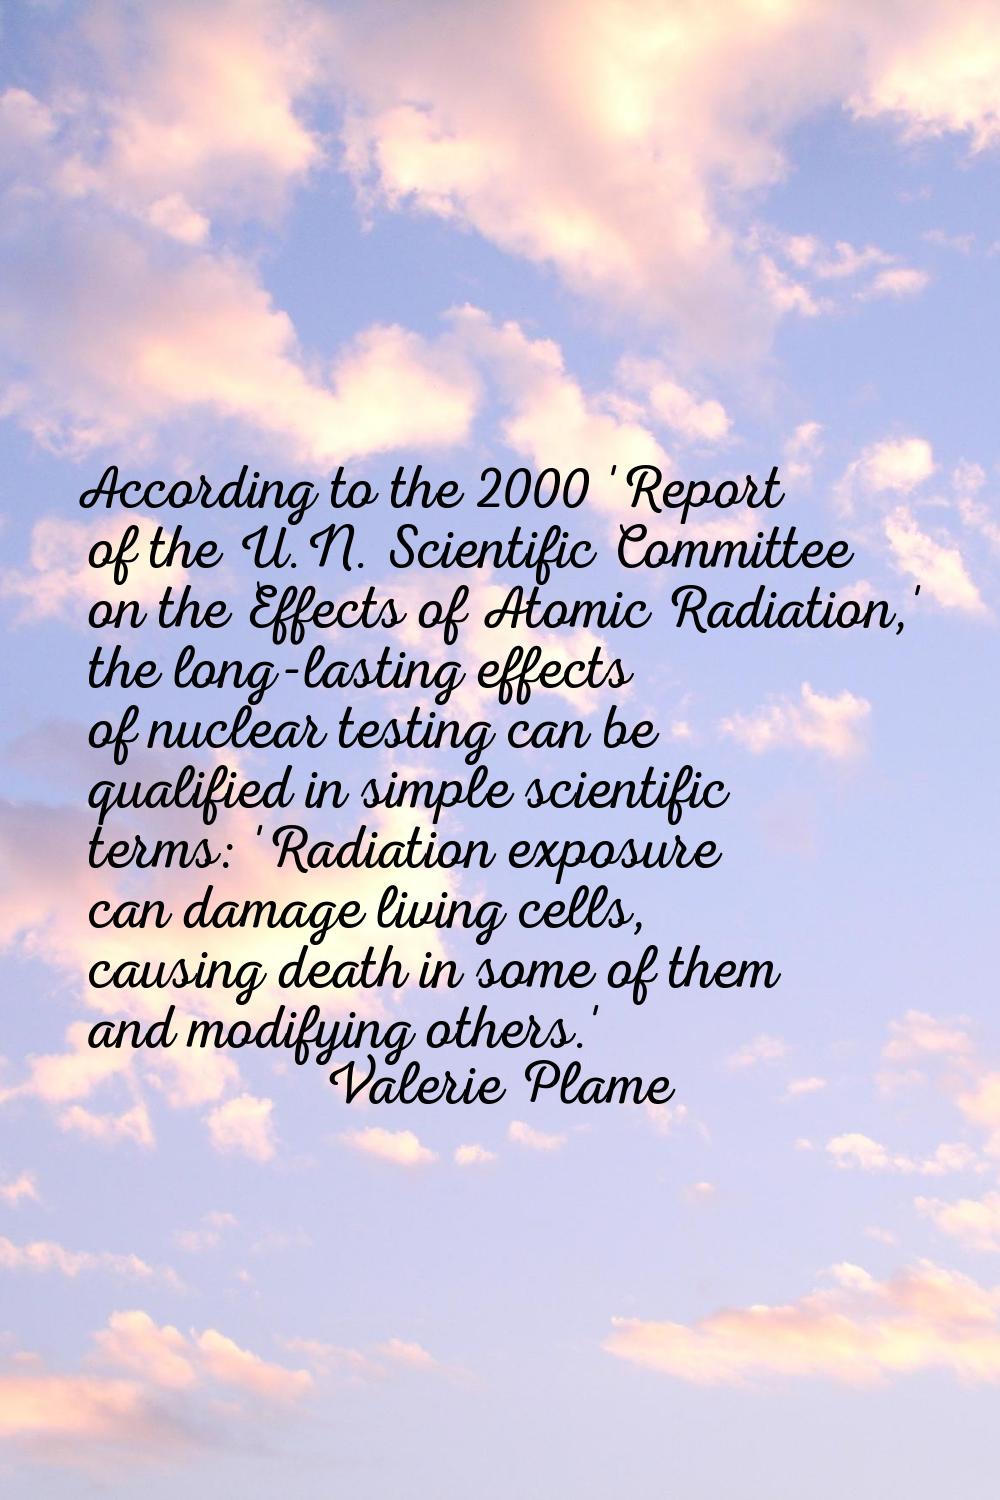 According to the 2000 'Report of the U.N. Scientific Committee on the Effects of Atomic Radiation,'